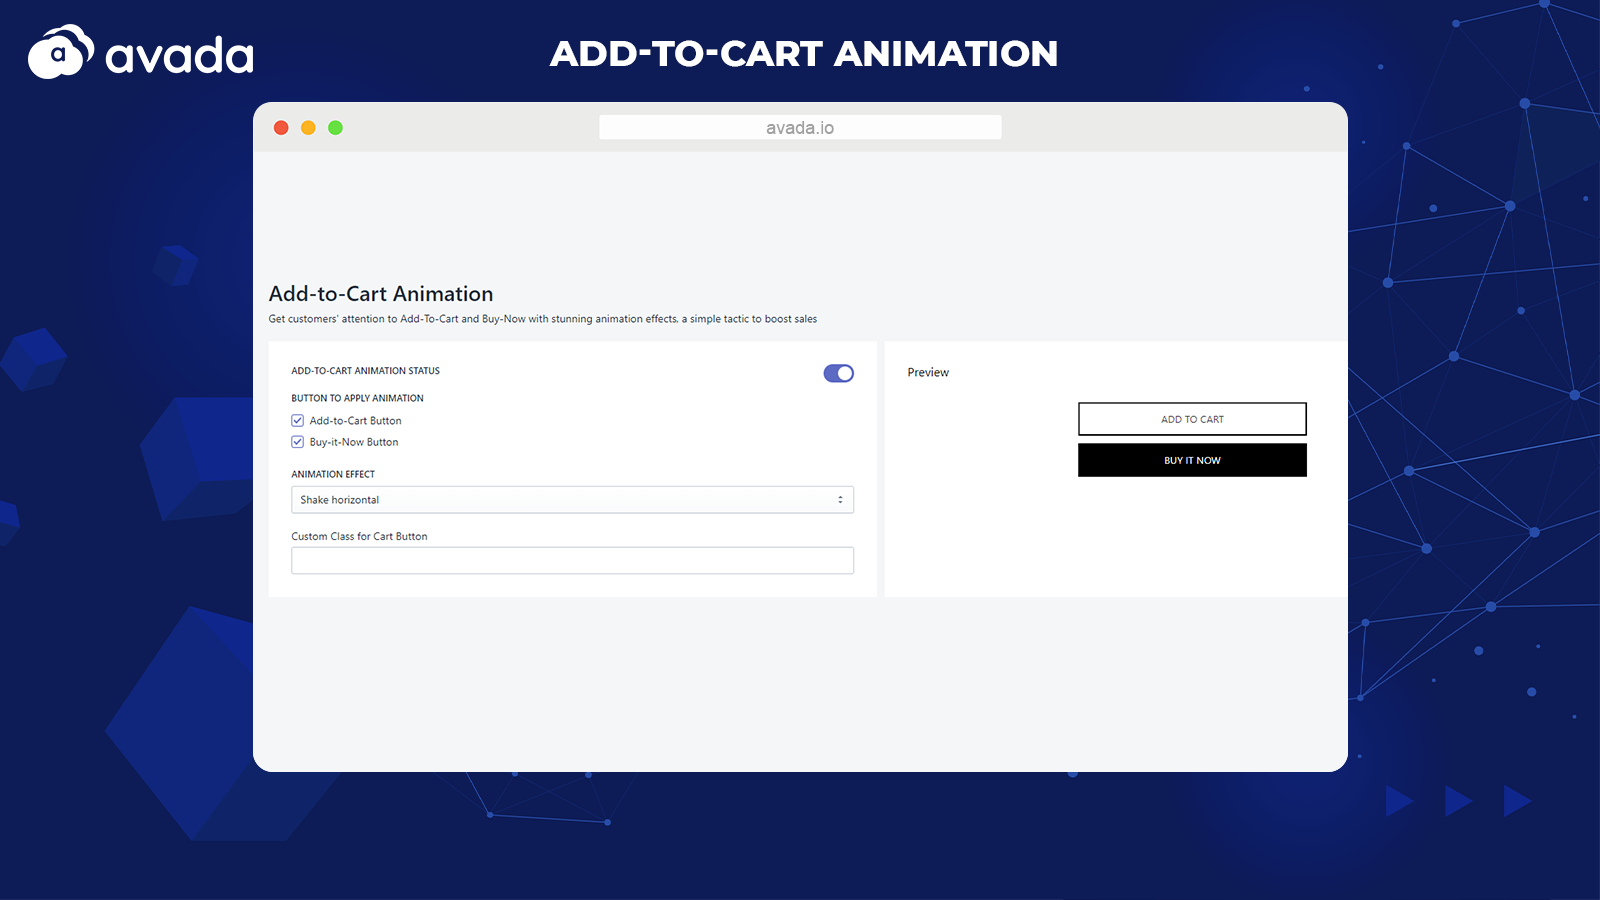 Add-to-cart Animation